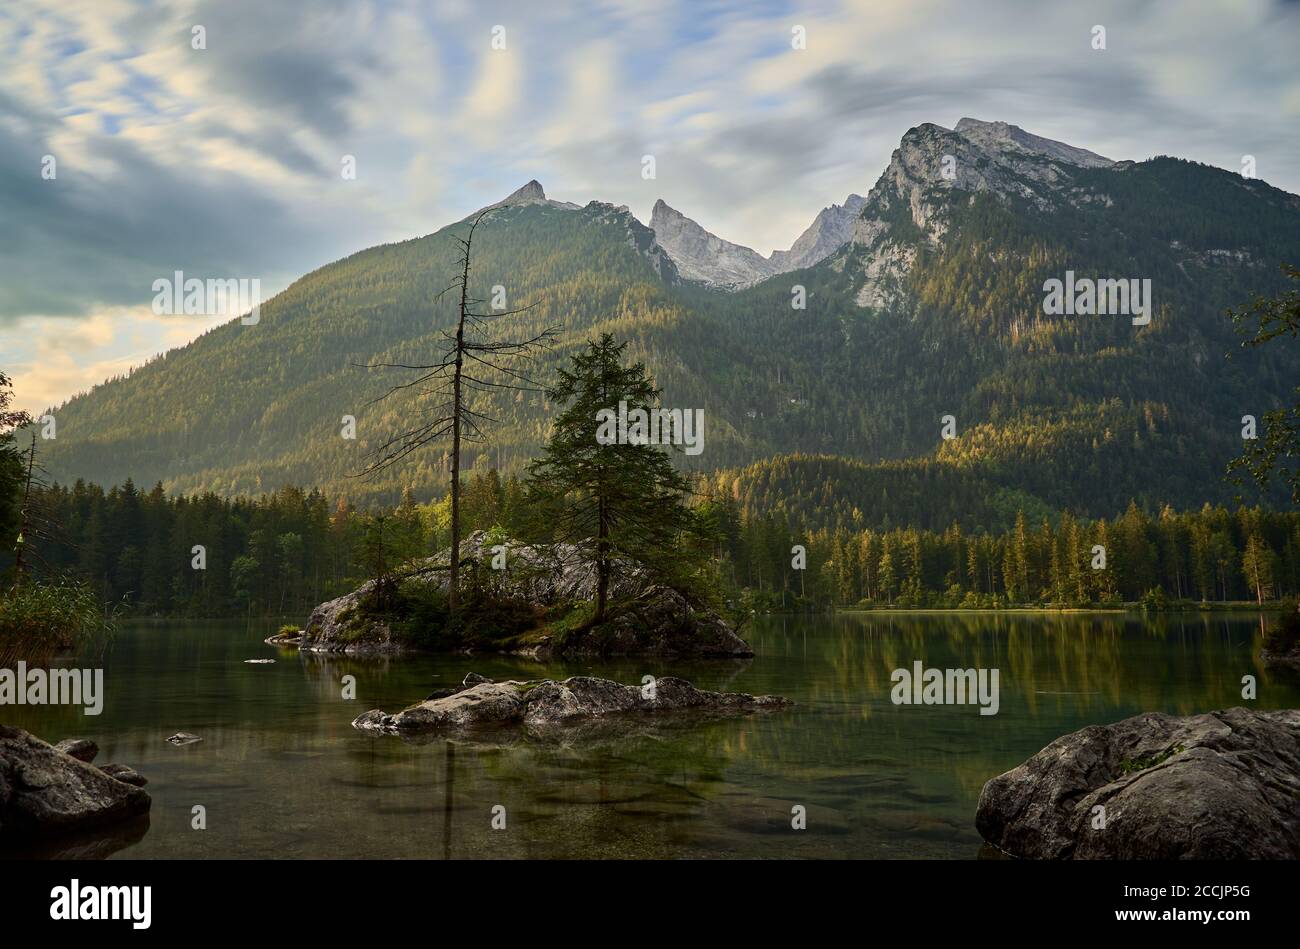 Alpine landscape with Lake Hintersee and Berchtesgaden Alps at sunrise in Ramsau, Germany Stock Photo